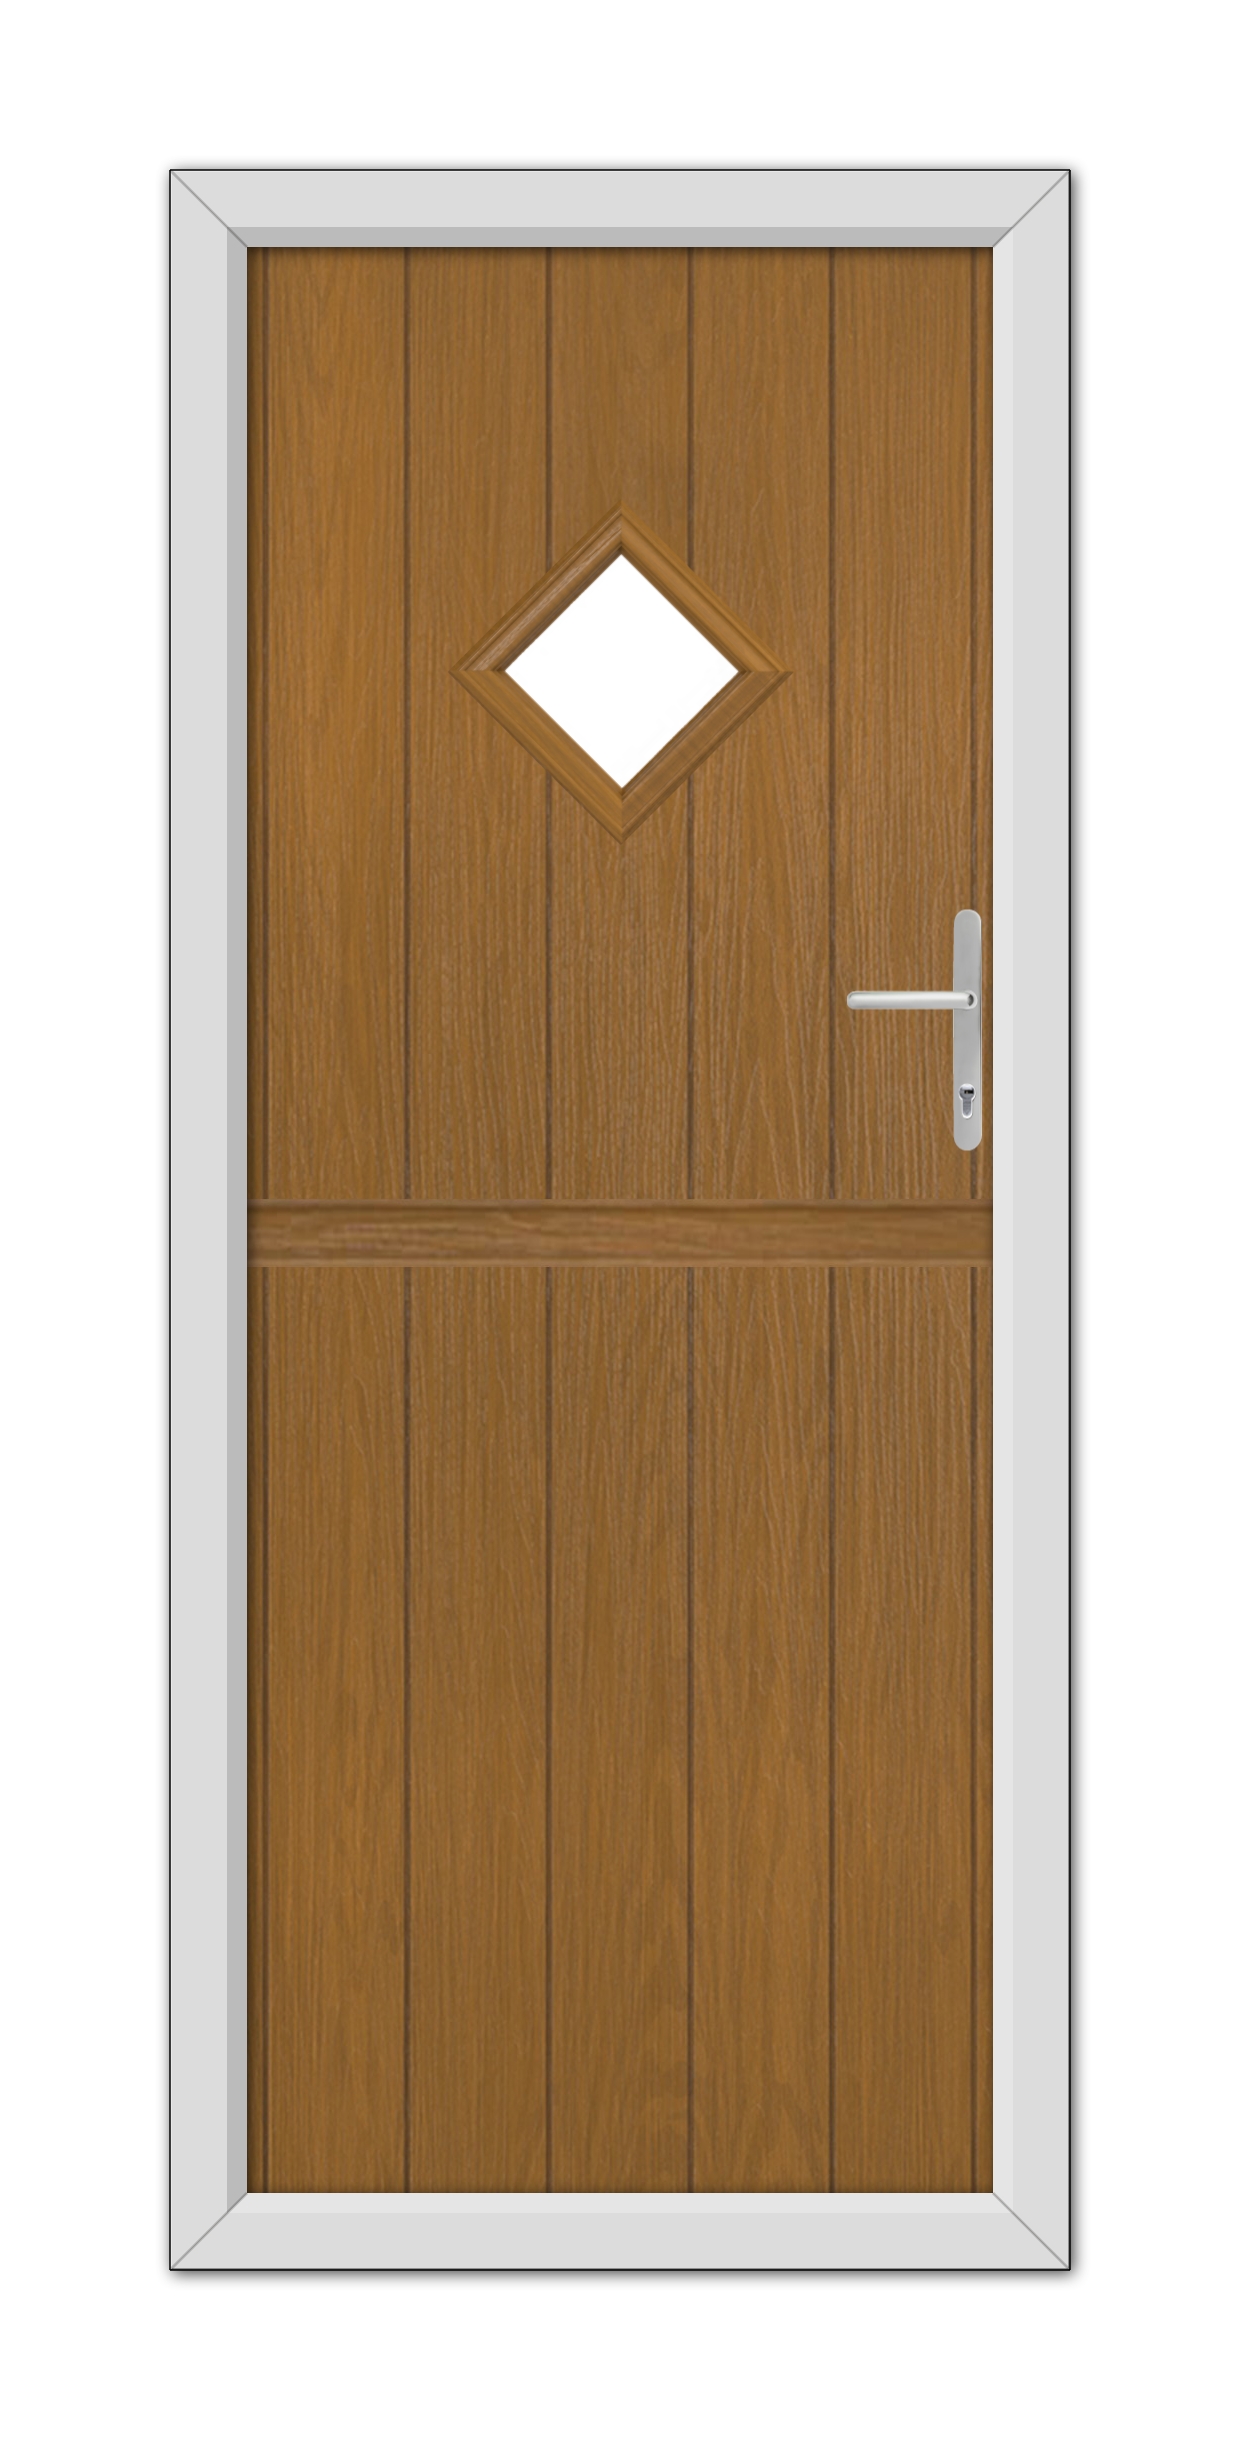 A modern Oak Cornwall Stable Composite Door 48mm Timber Core with a diamond-shaped window, framed in white, featuring a metal handle on the right side.